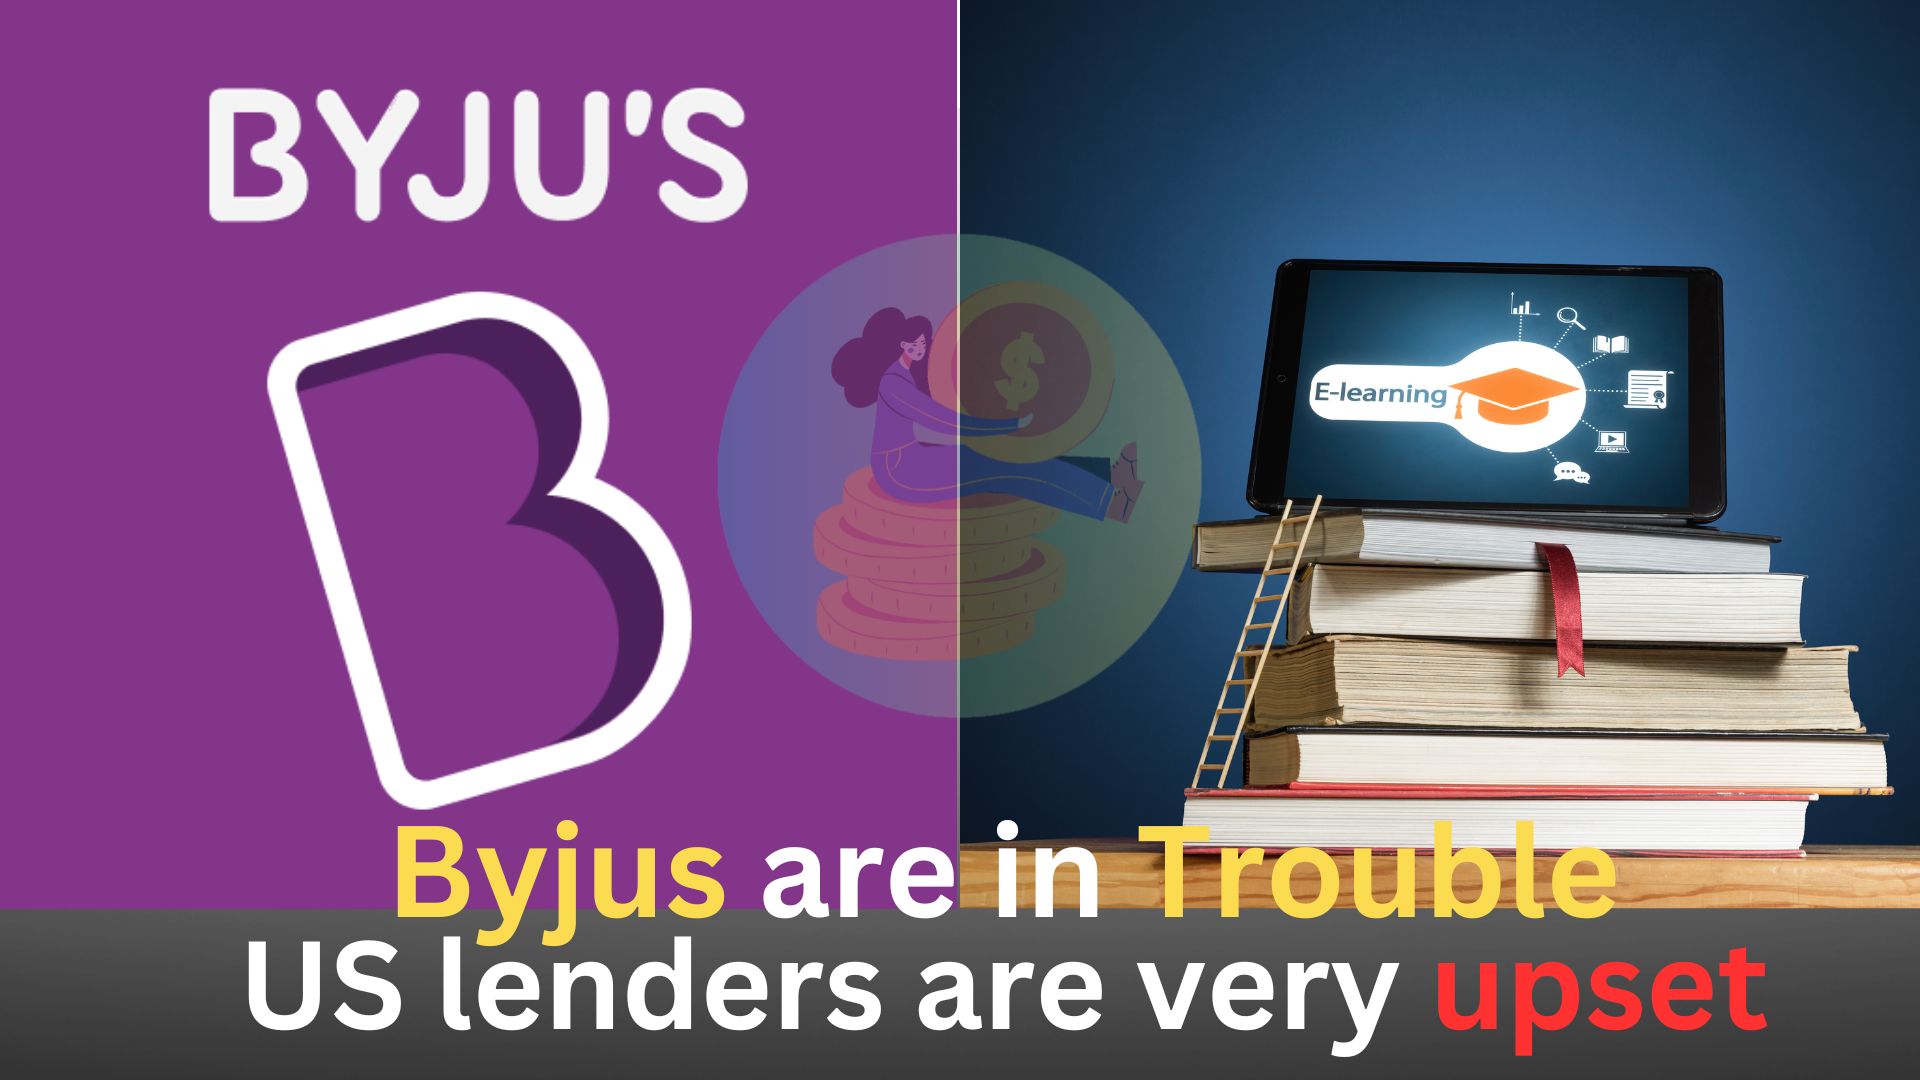 Byjus are in Trouble, US lenders are very upset